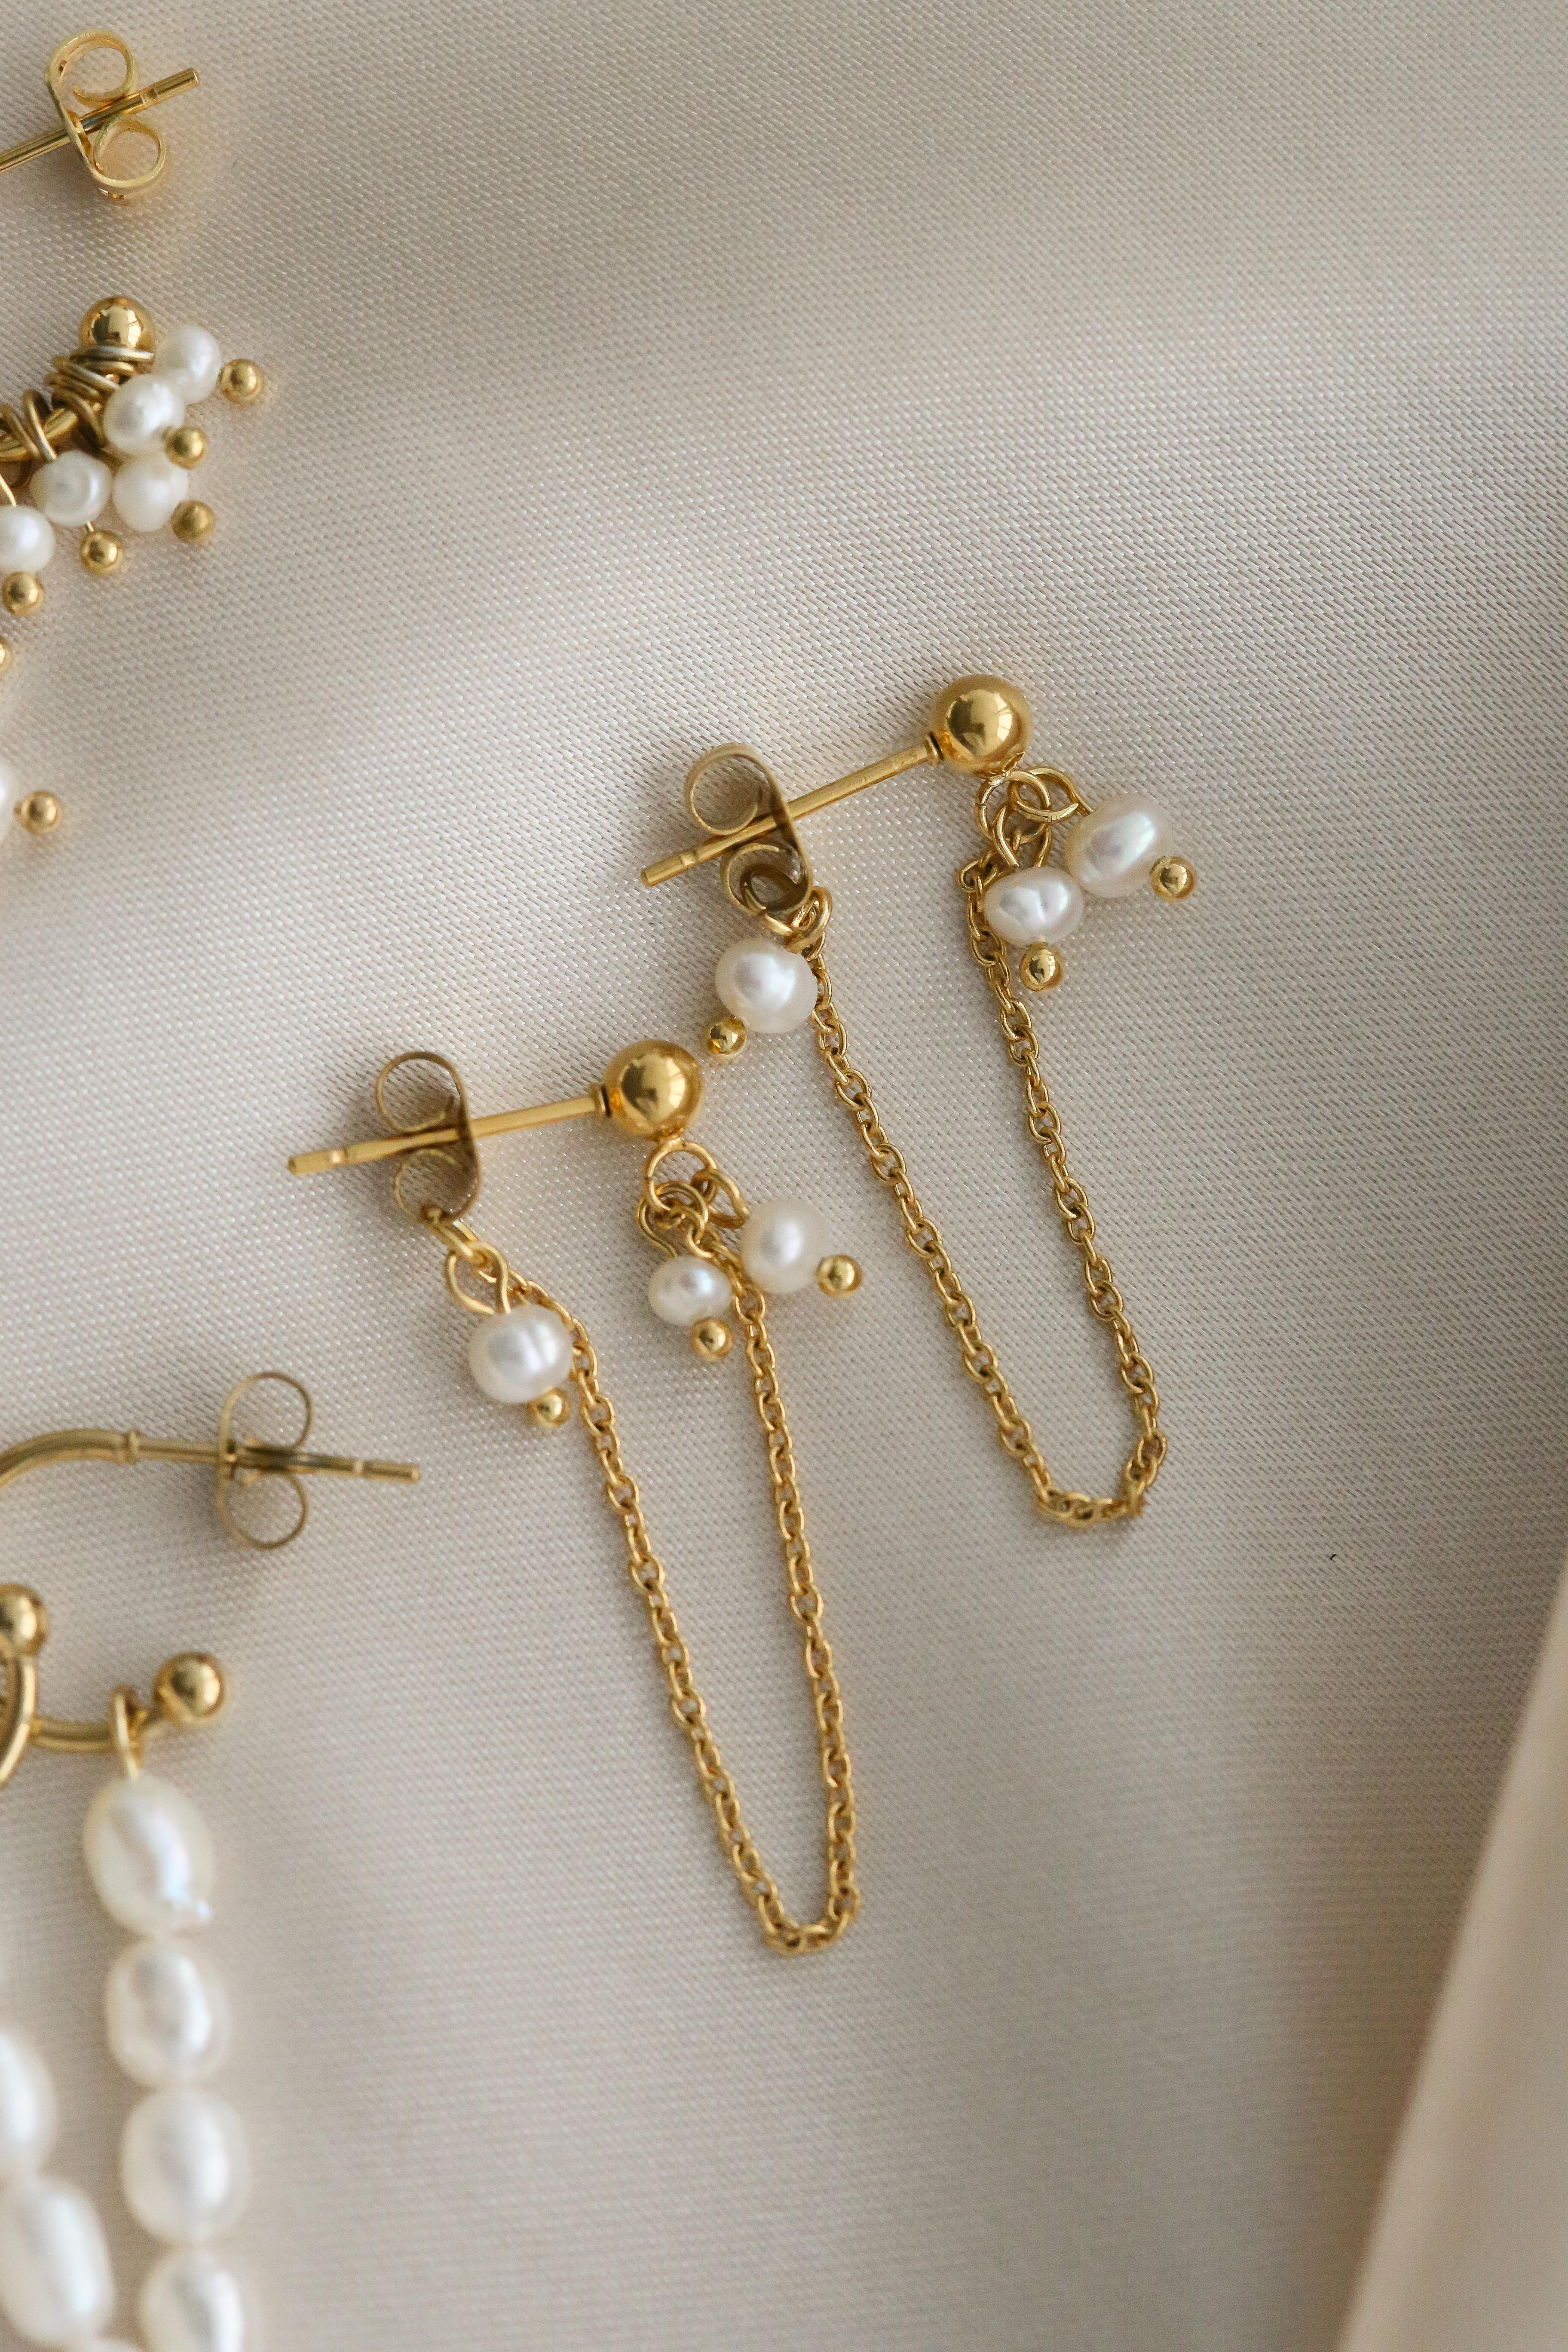 Blanche Earrings - Boutique Minimaliste has waterproof, durable, elegant and vintage inspired jewelry